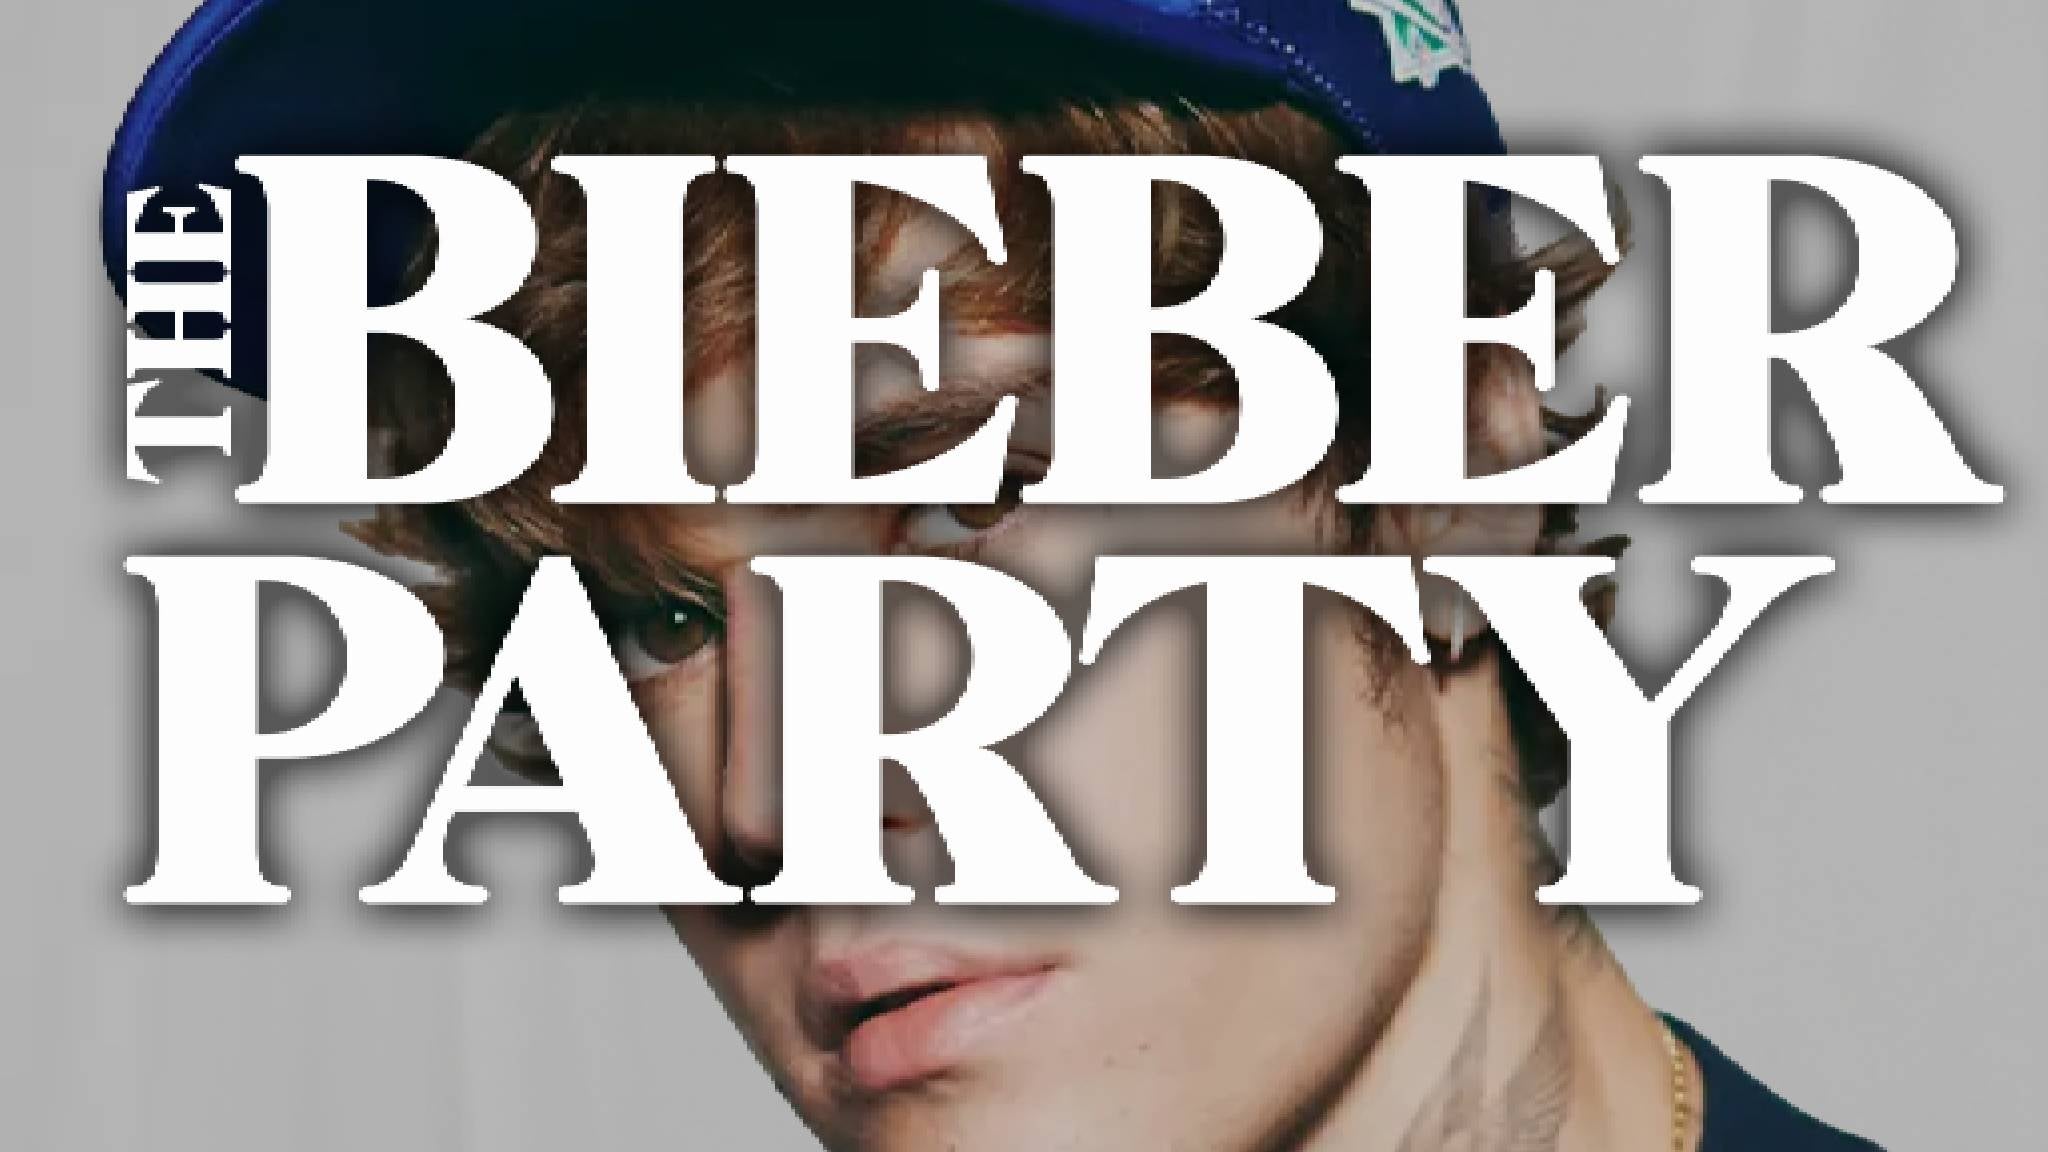 The Bieber Party: Justin Bieber Night pre-sale password for advance tickets in Albany